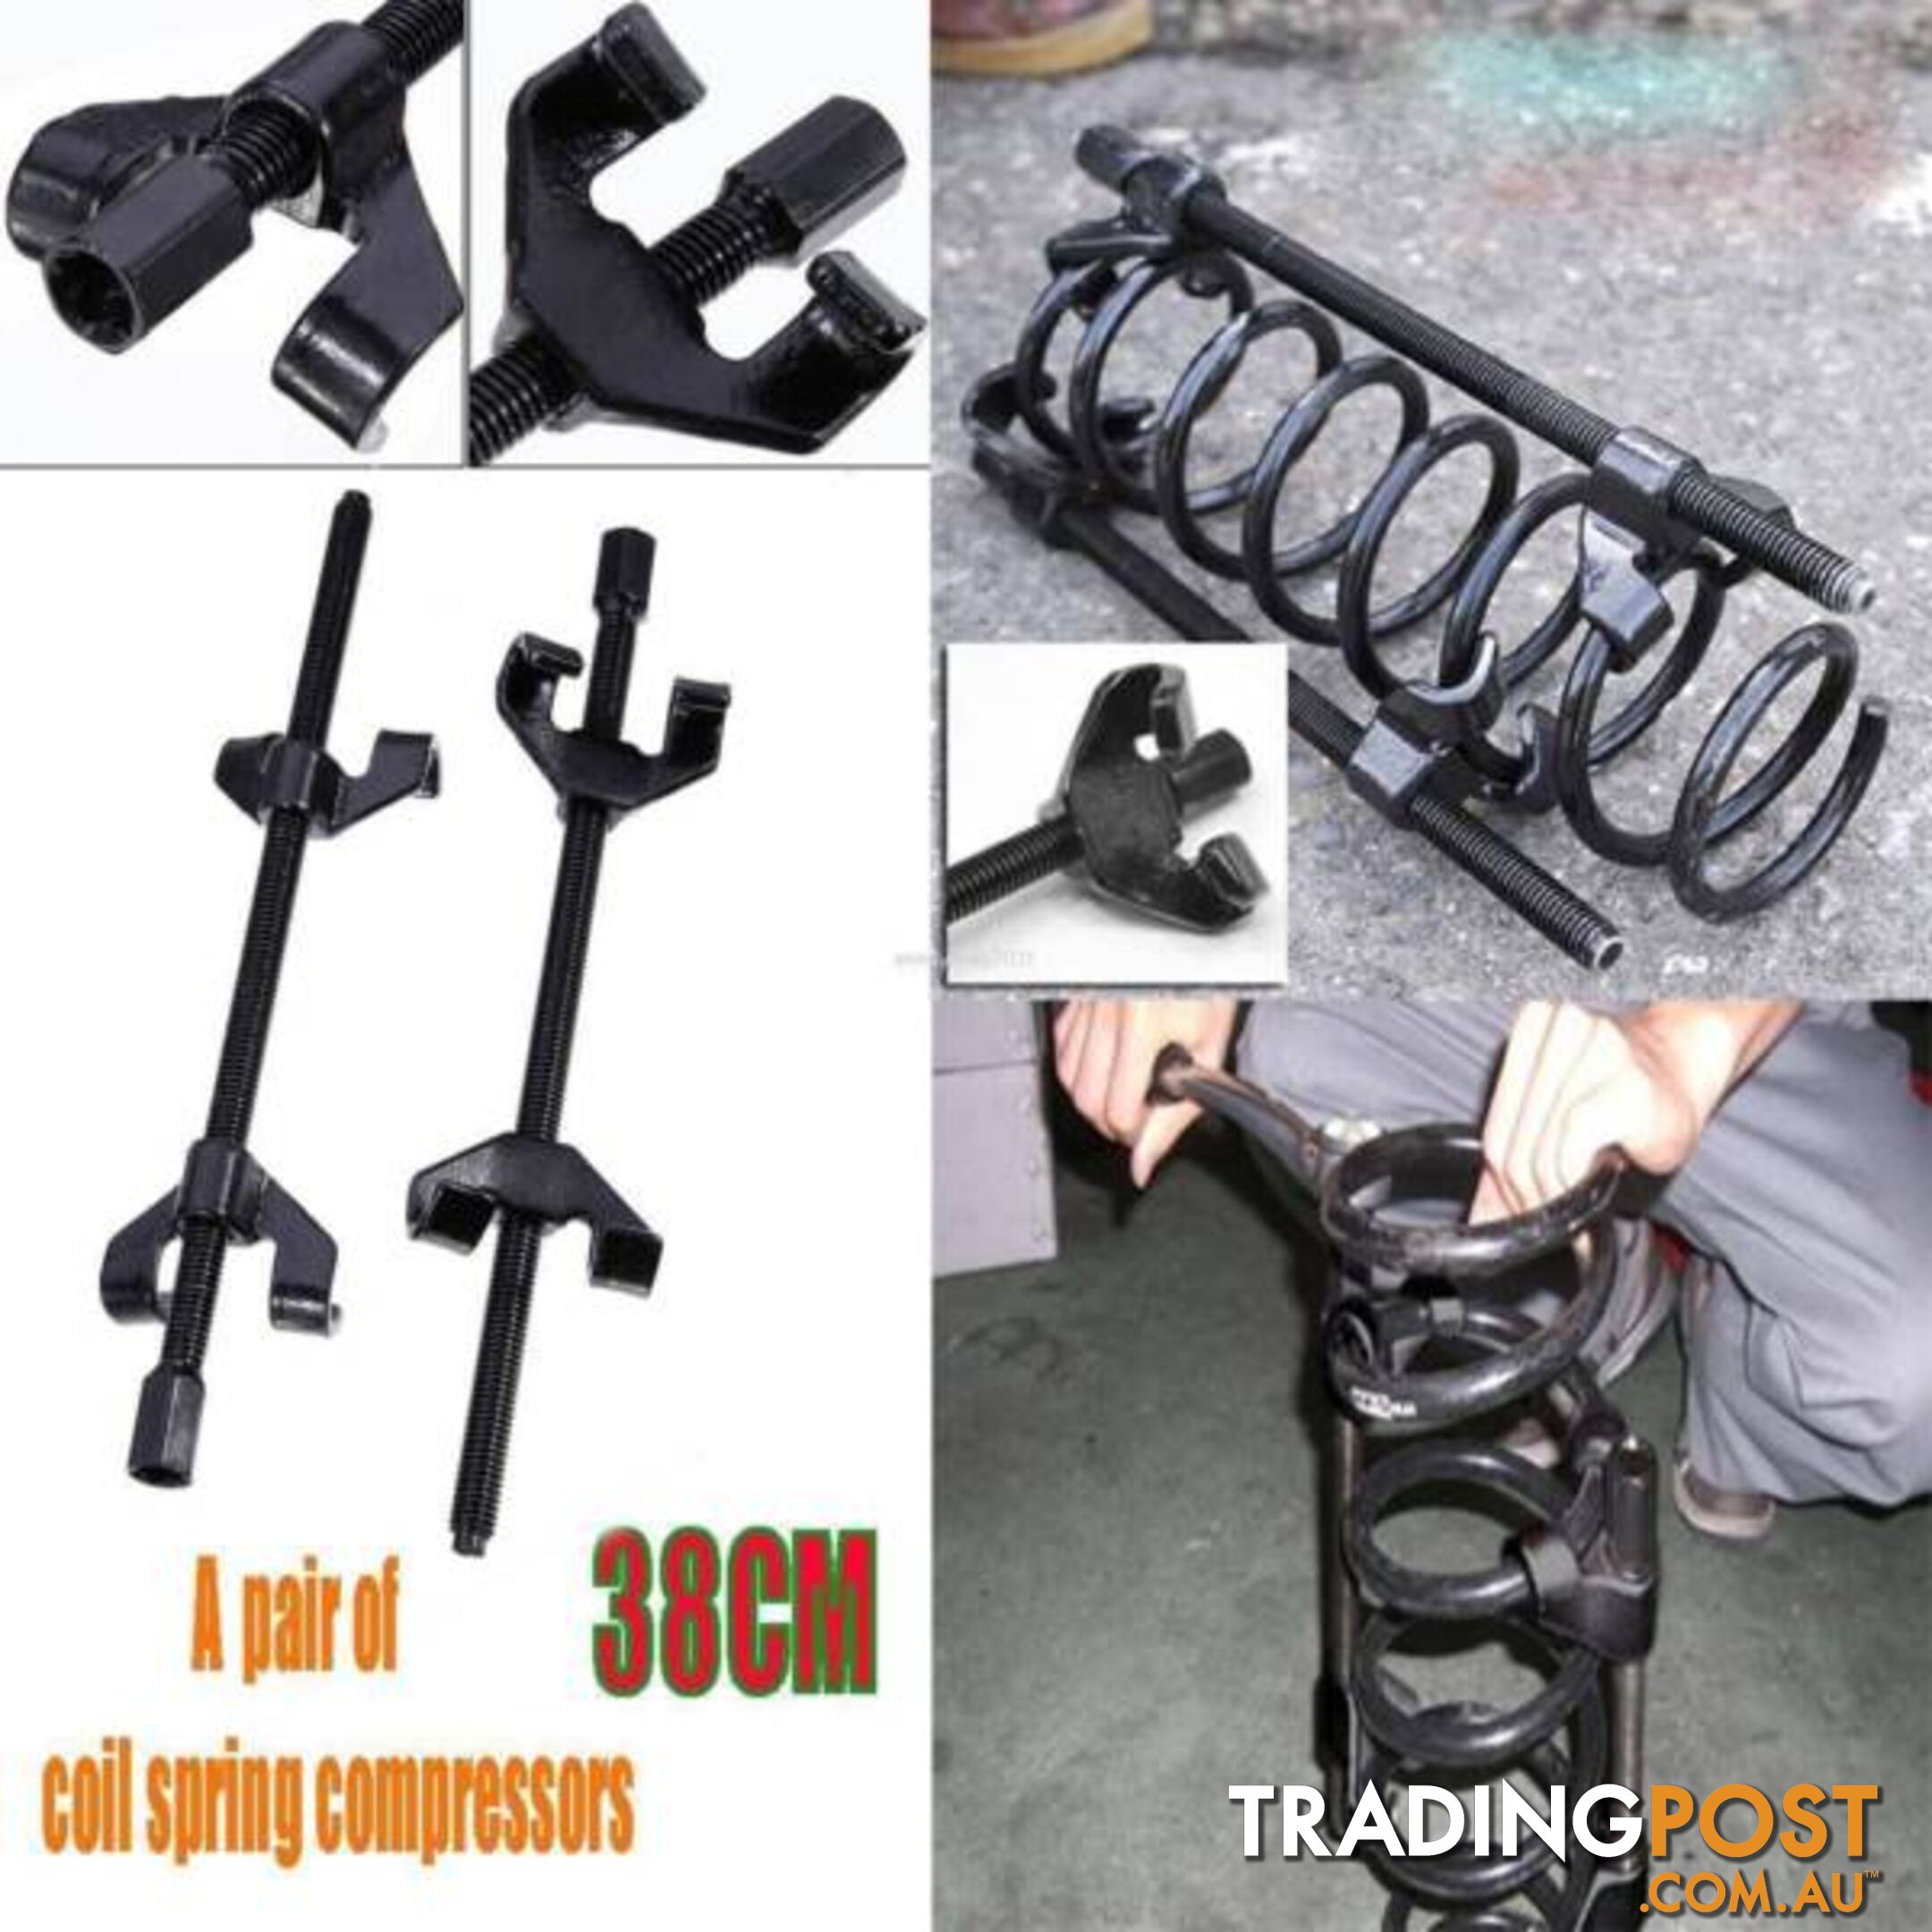 ASSORTED MECHANICS TOOLS (new) From: $5